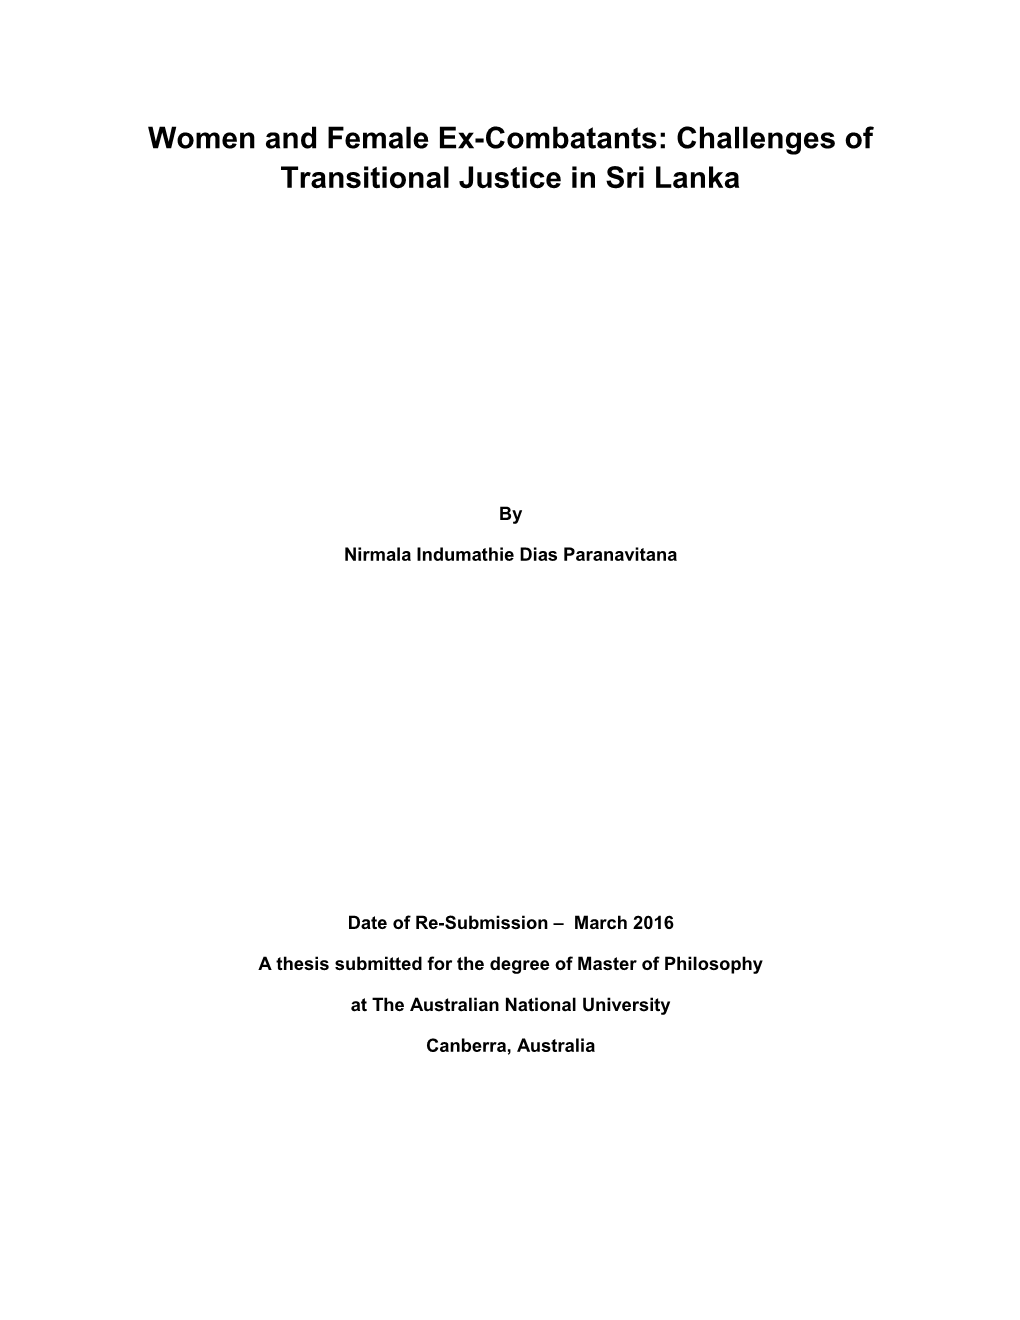 Challenges of Transitional Justice in Sri Lanka